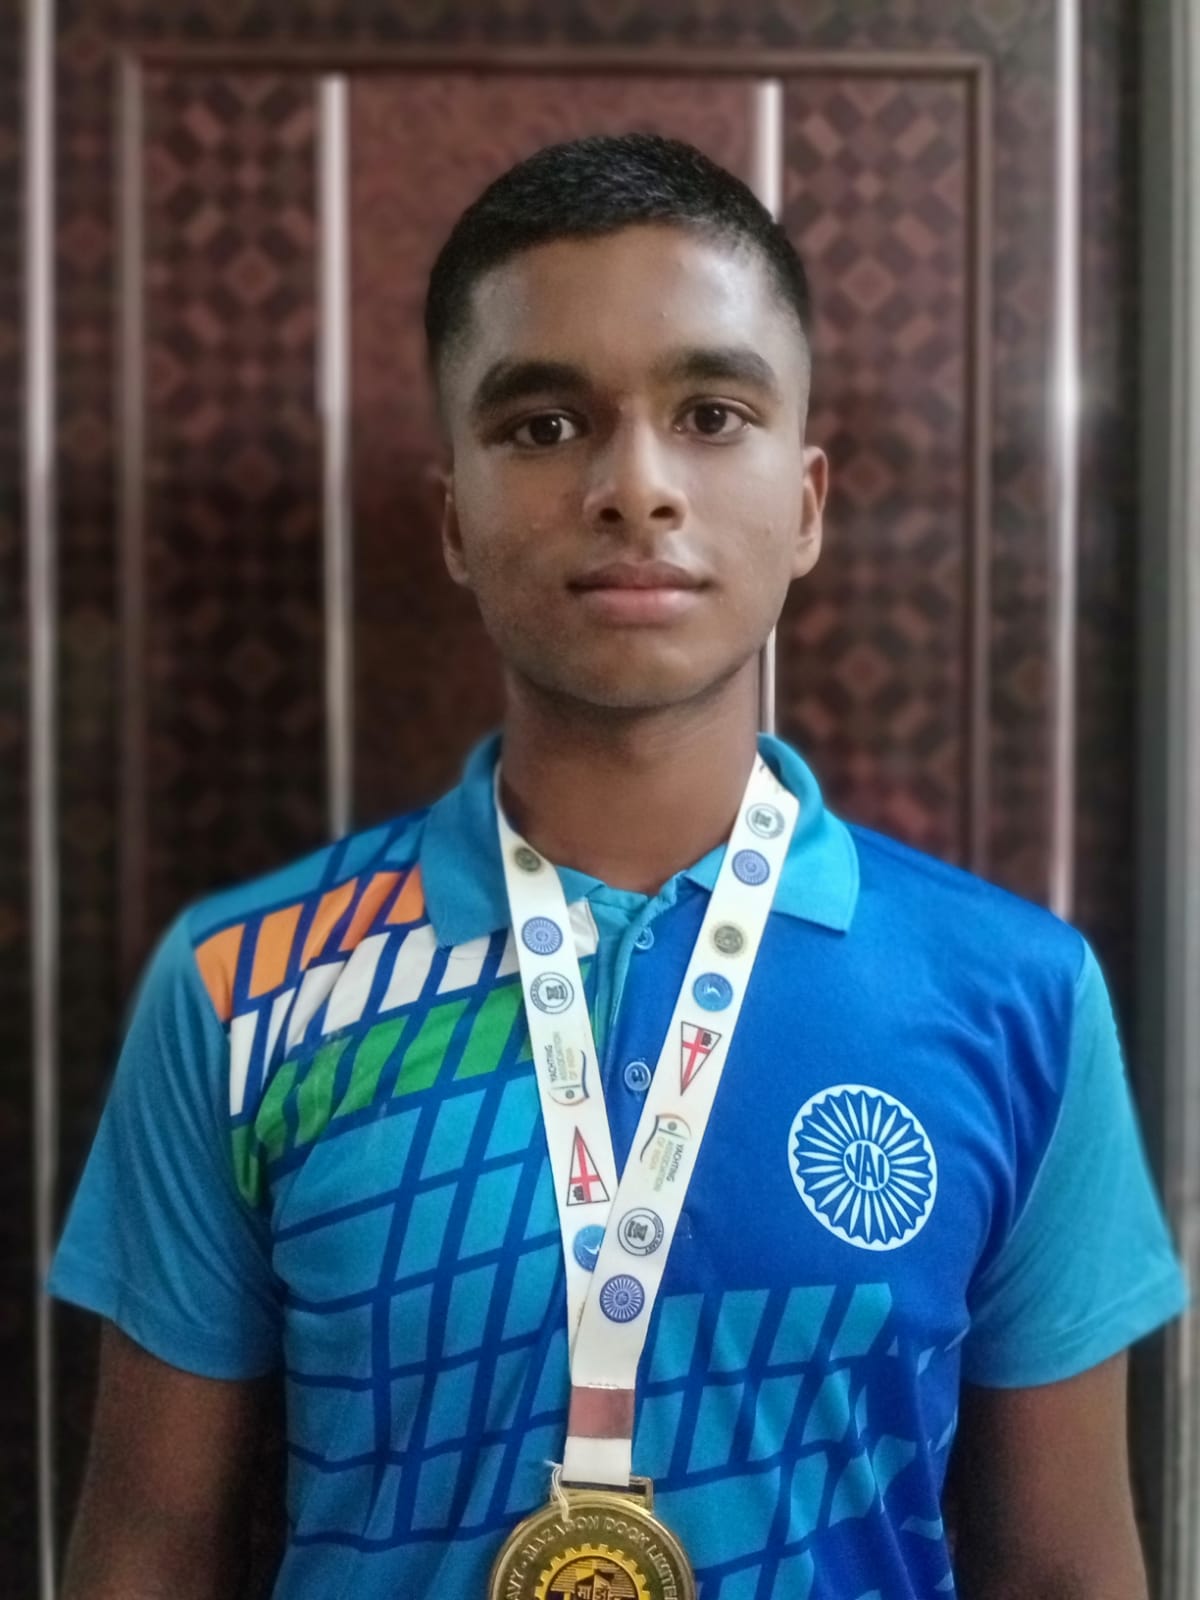 15 year old Sachin Ganesh becomes youngest sailor to win senior national title